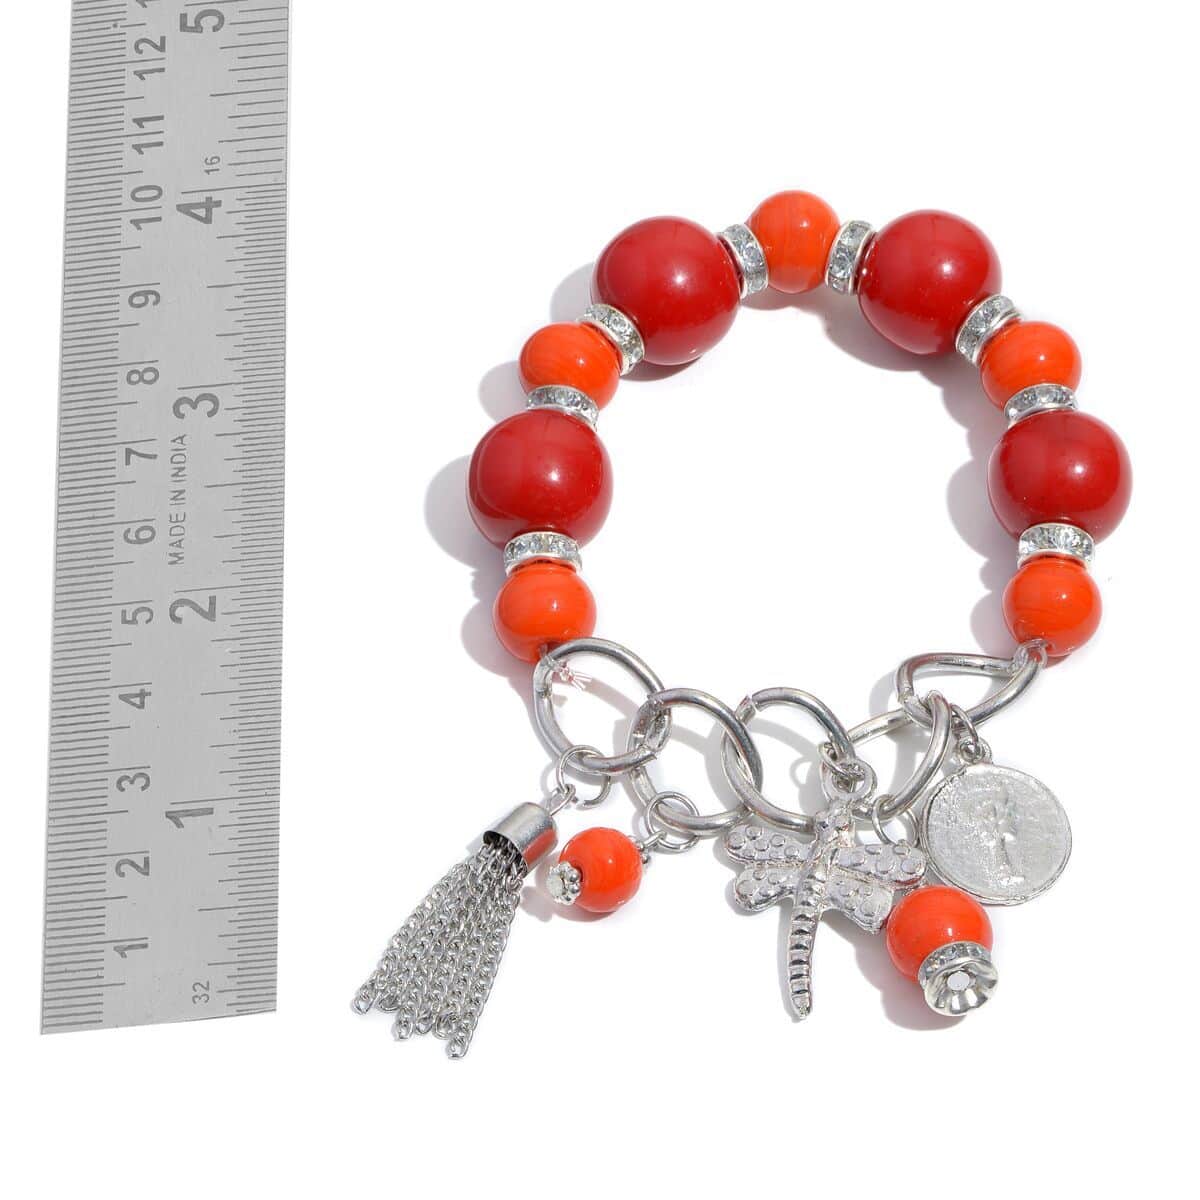 Red and Orange Chroma, Austrian Crystal Charm Stretch Bracelet and Earrings in Silvertone and Stainless Steel with Velvet Pouch image number 2